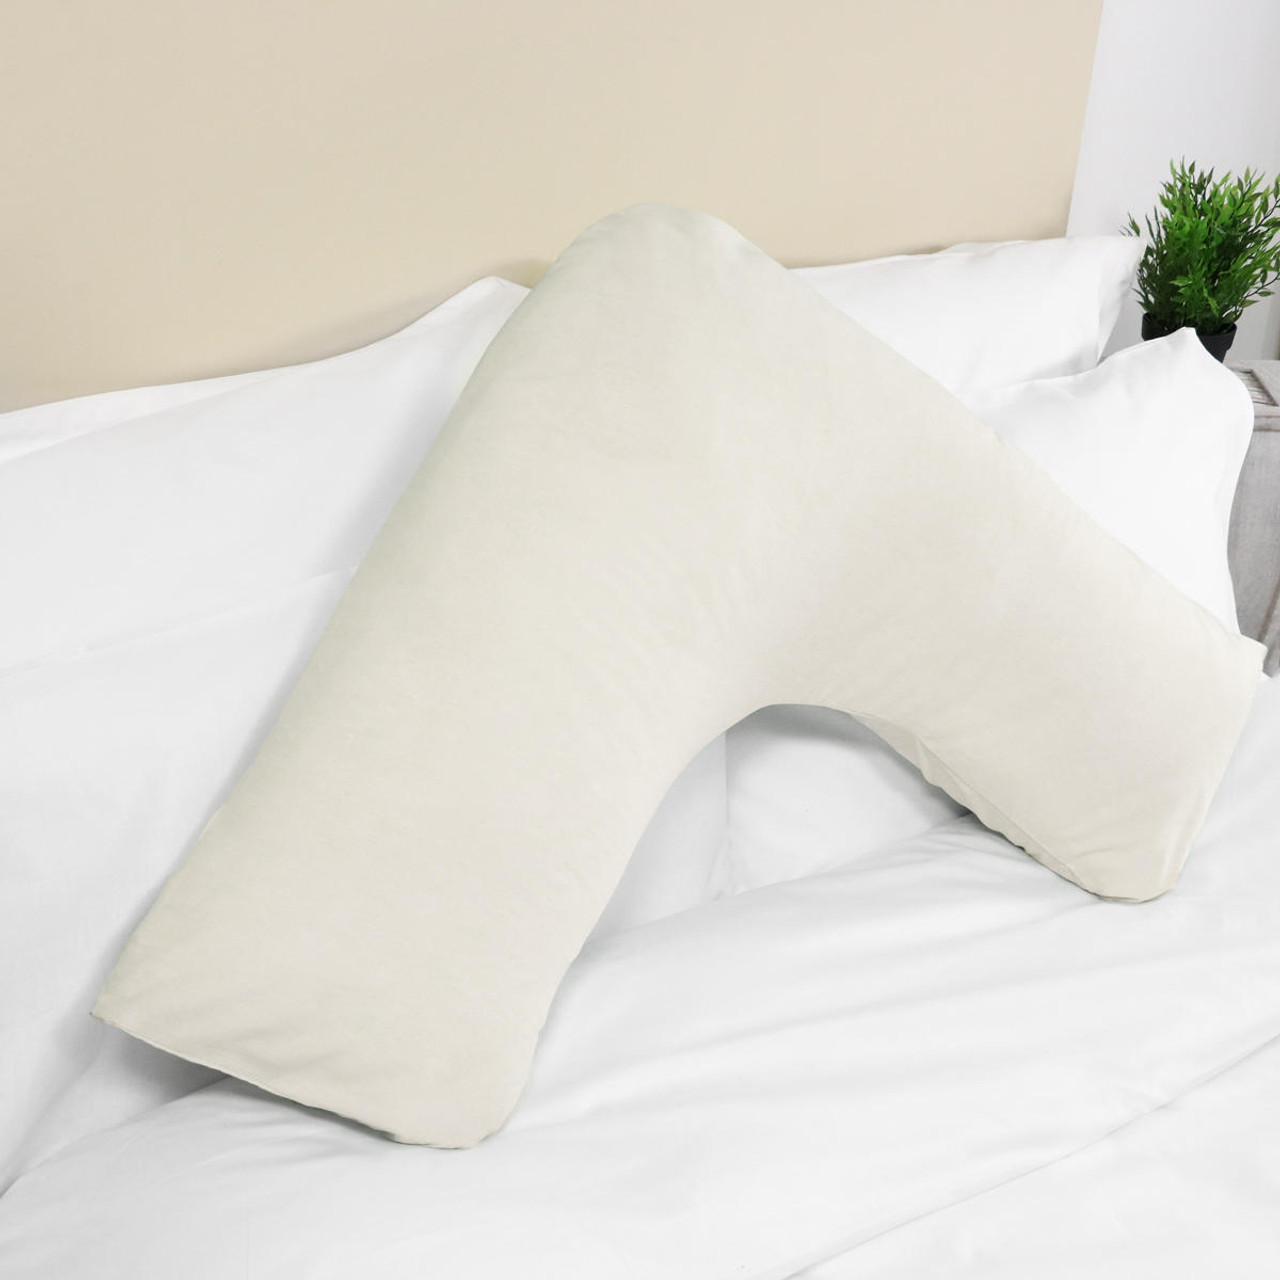 LUXURY ORTHOPAEDIC HOLLOWFIBRE V PILLOW WITH ONE MATCHING  GREEN V PILLOWCASE 